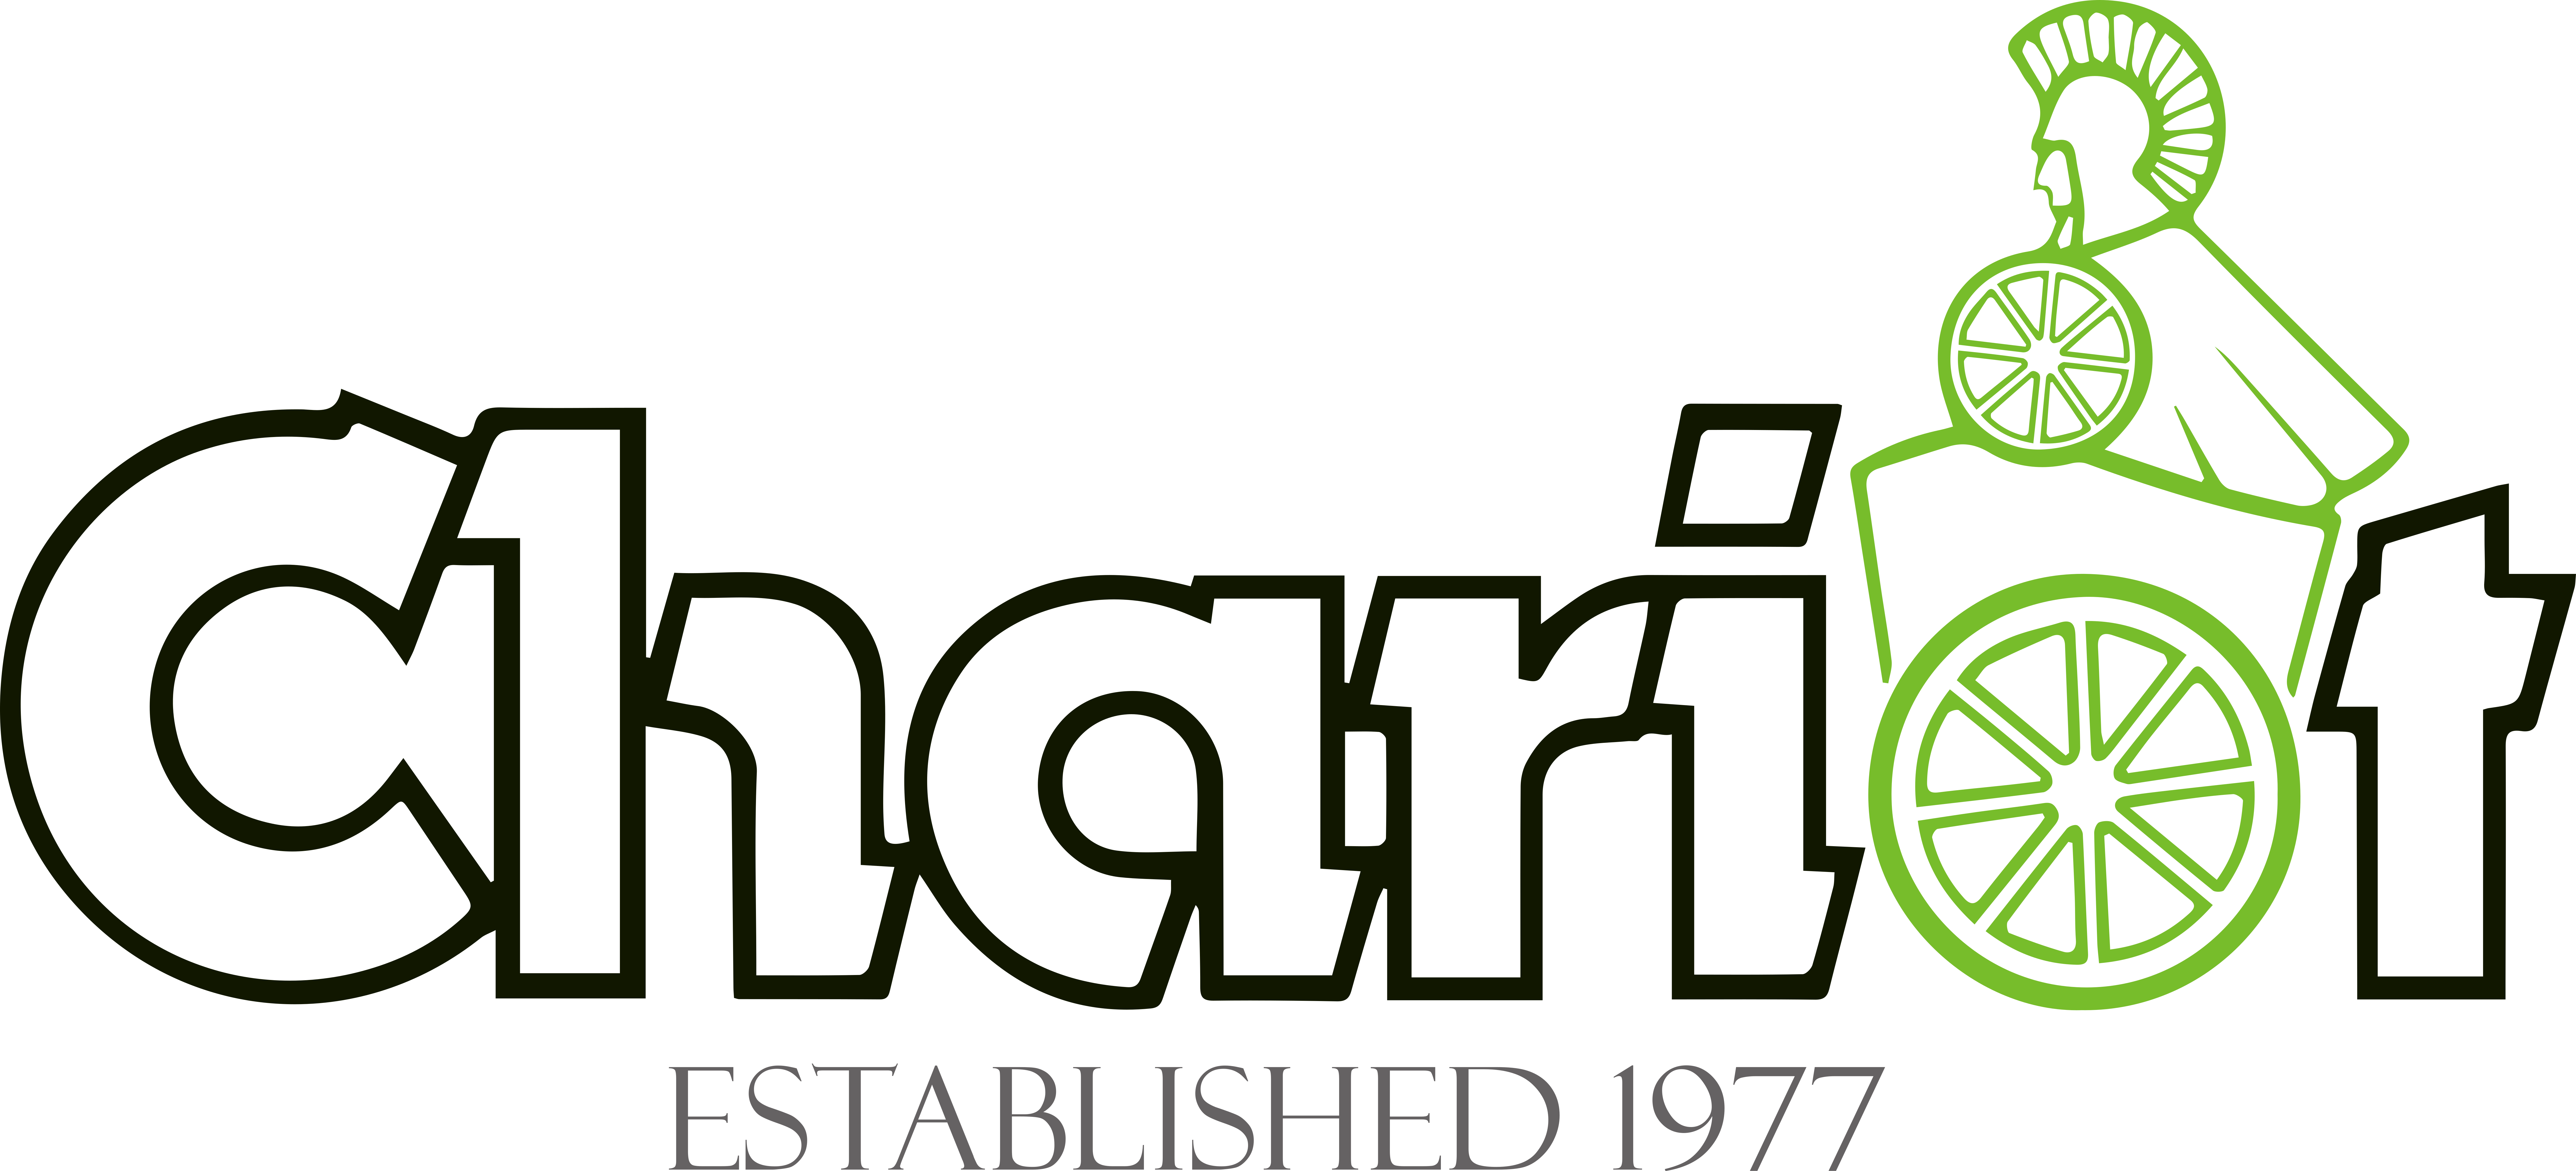 logo for Chariot Office Supplies